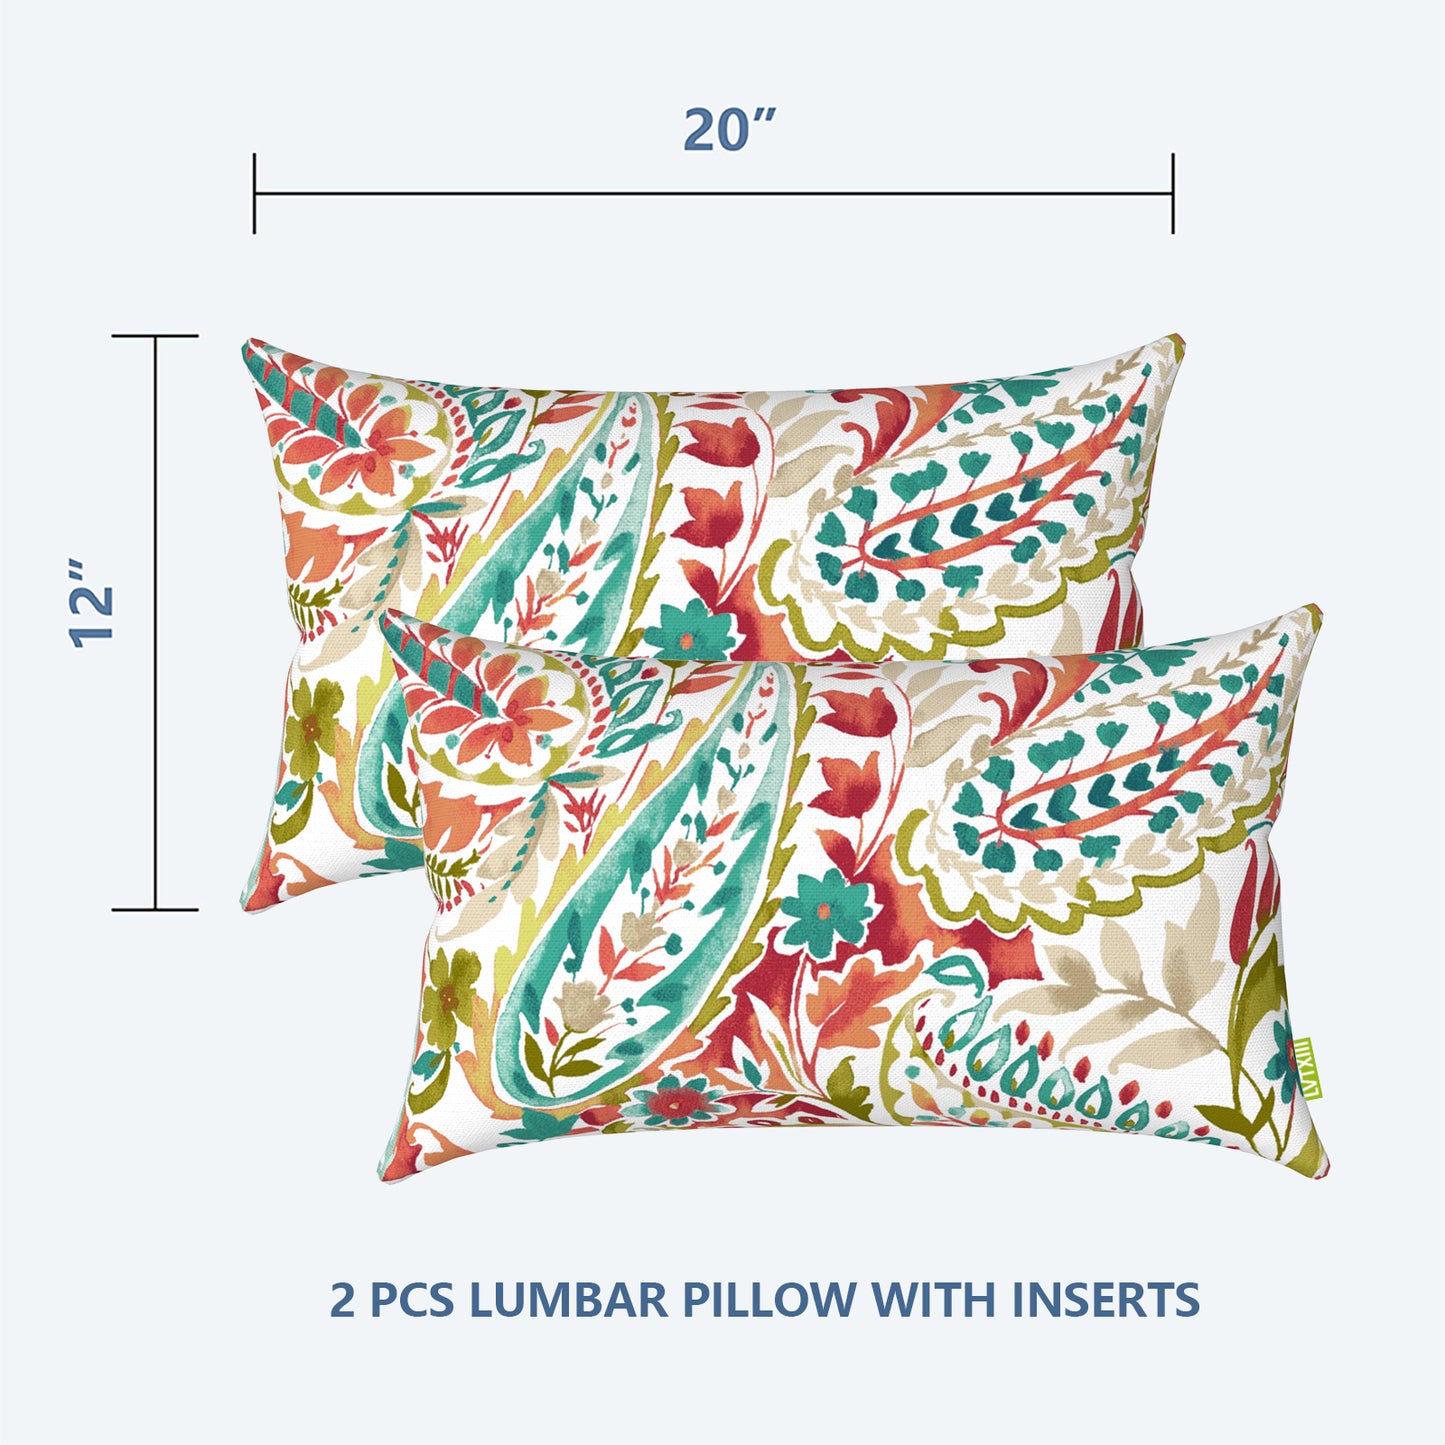 Melody Elephant Outdoor/Indoor Lumbar Pillows, Water Repellent Cushion Pillows, 12x20 Inch, Outdoor Pillows with Inserts for Home Garden, Pack of 2, Pretty Paisley